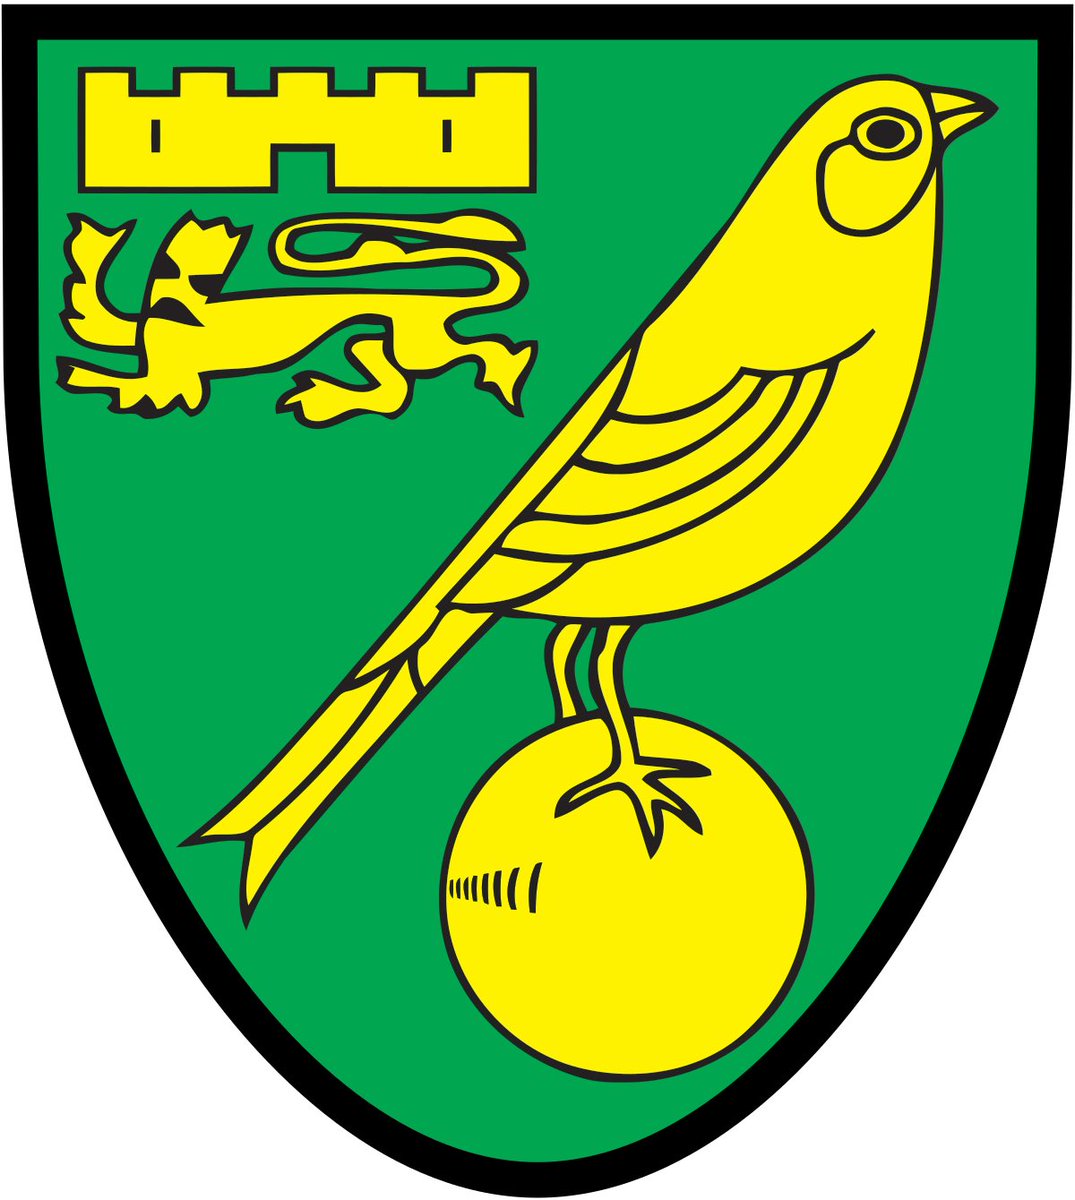 Lamar Davis as Norwich. Franklins partner in crime. Sticking with each other as they try to make a living but Franklin leaves Lamar to improve his career, similar to what Sheffield did to Norwich this season by leaving them in the relegation zone